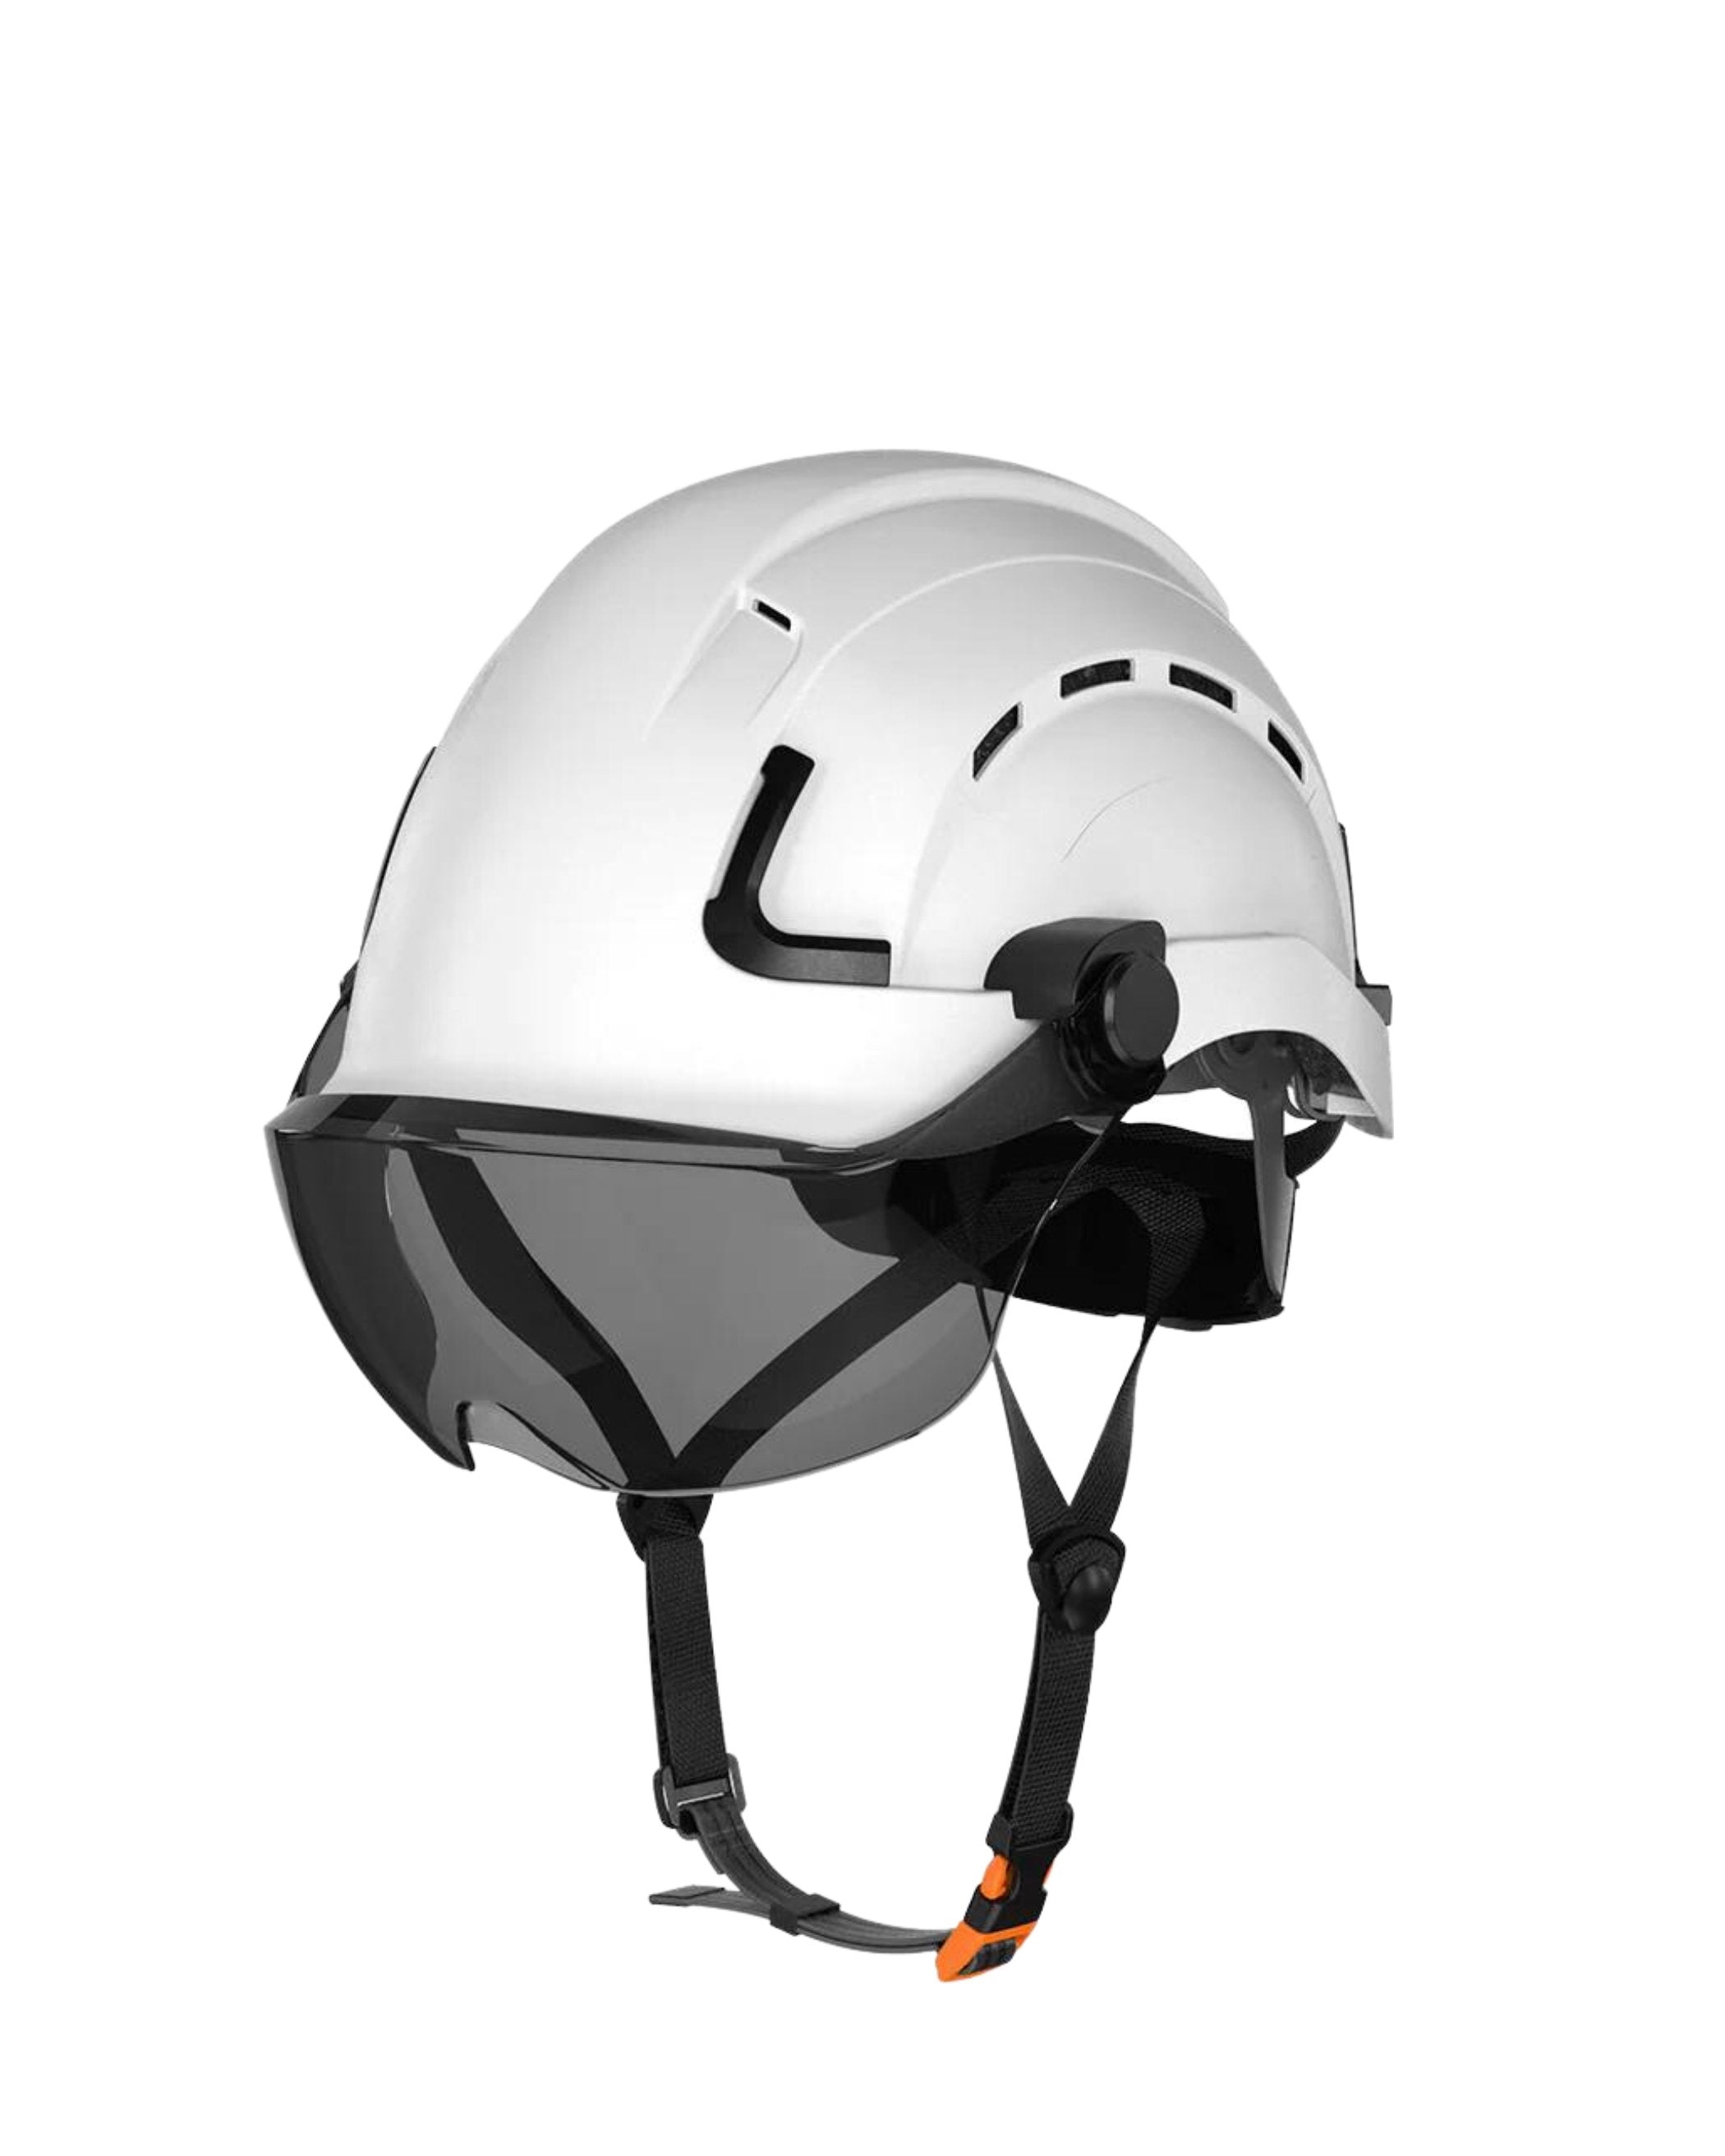 H2-CHV Safety Helmet w/ TINTED Visor Type 2 Class C, ANSI Z89 and EN12492  rated